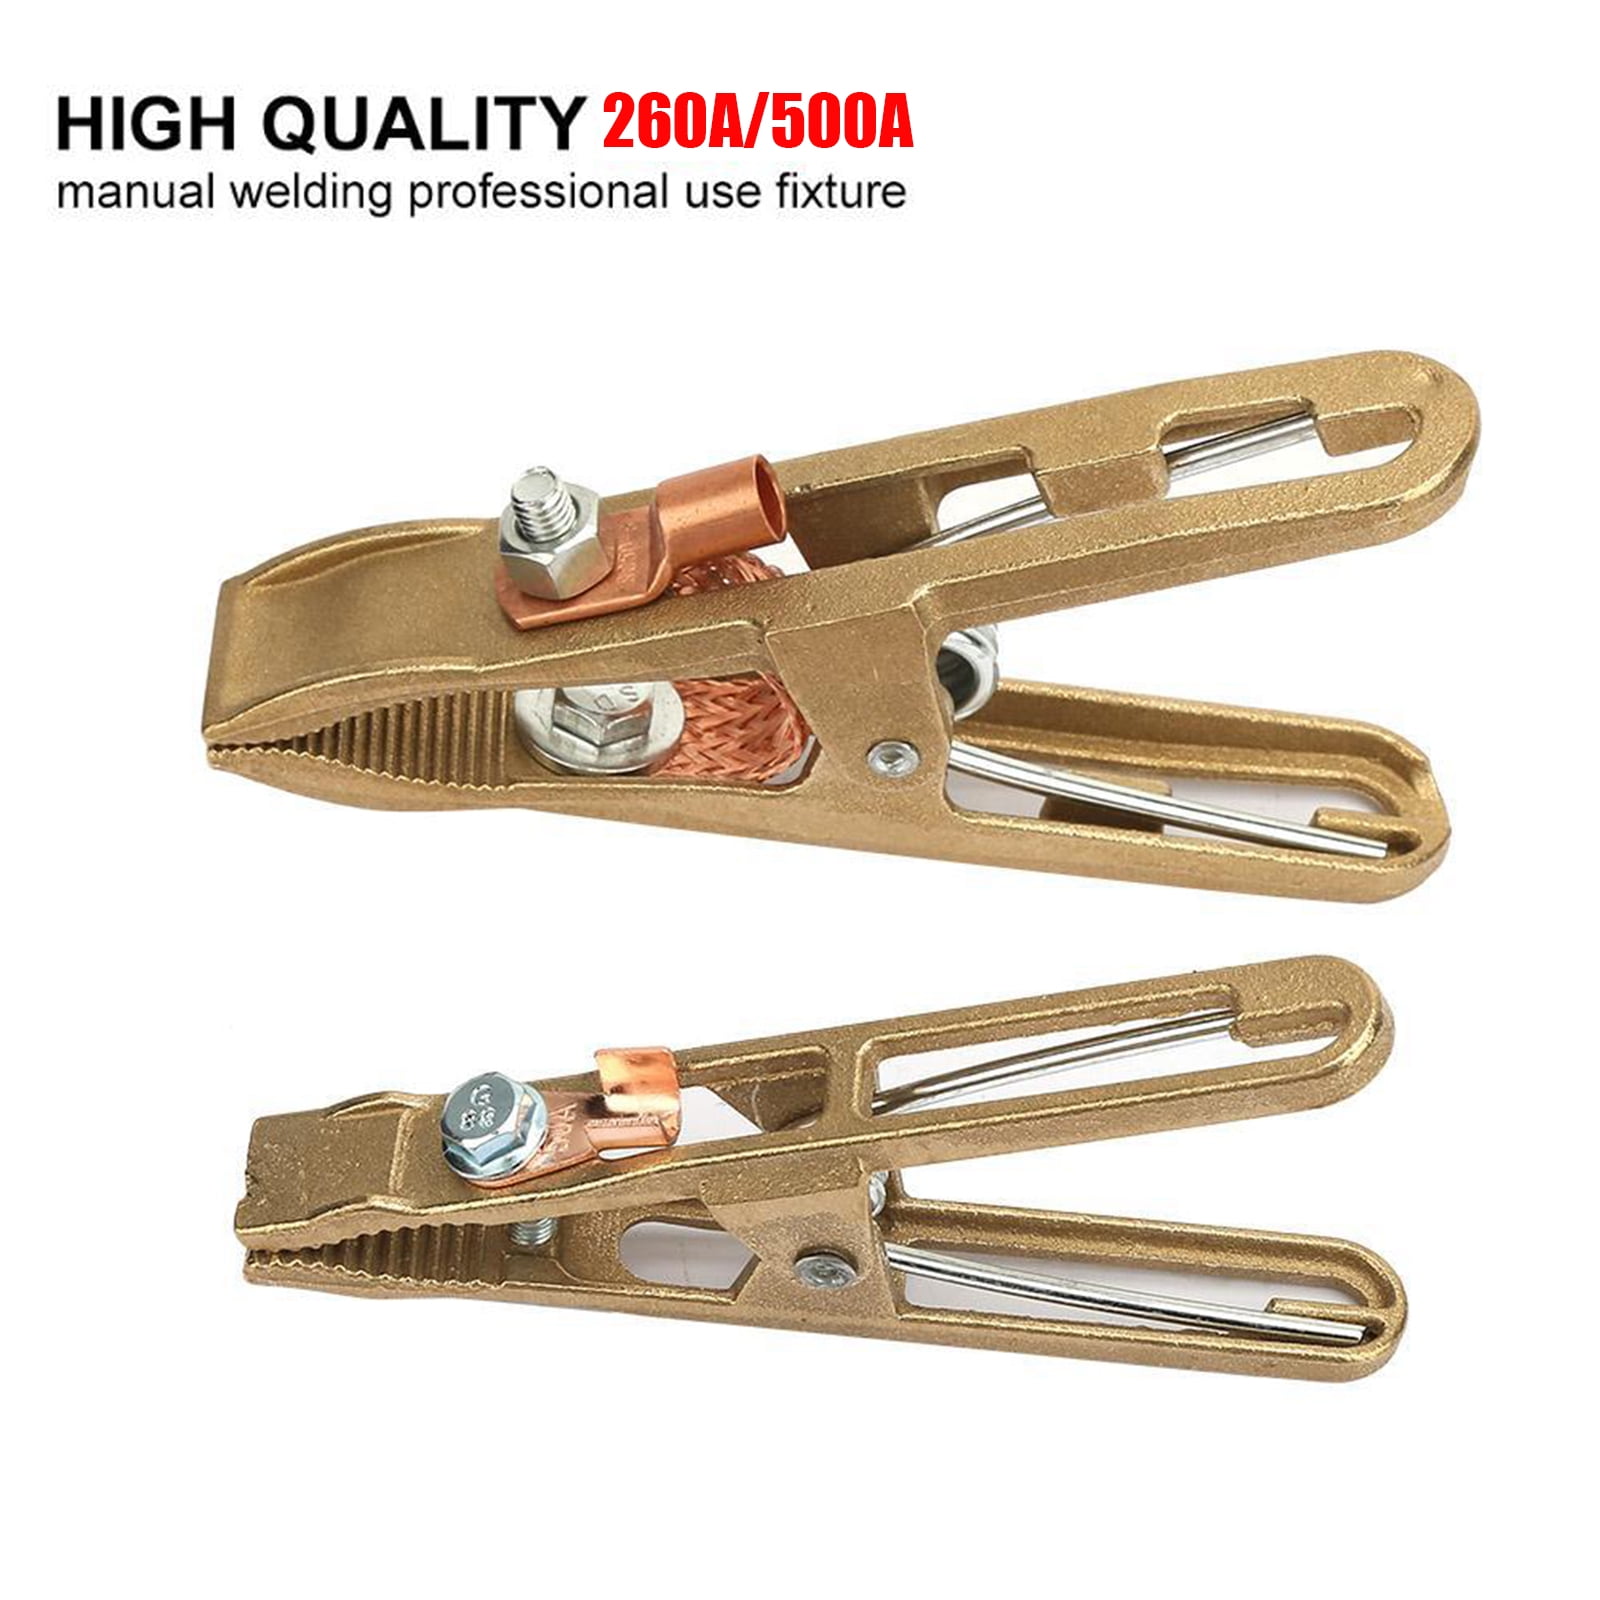 Copper Earth Ground Cable Clip Welding Manual Welder Electrode Holder Clamp 